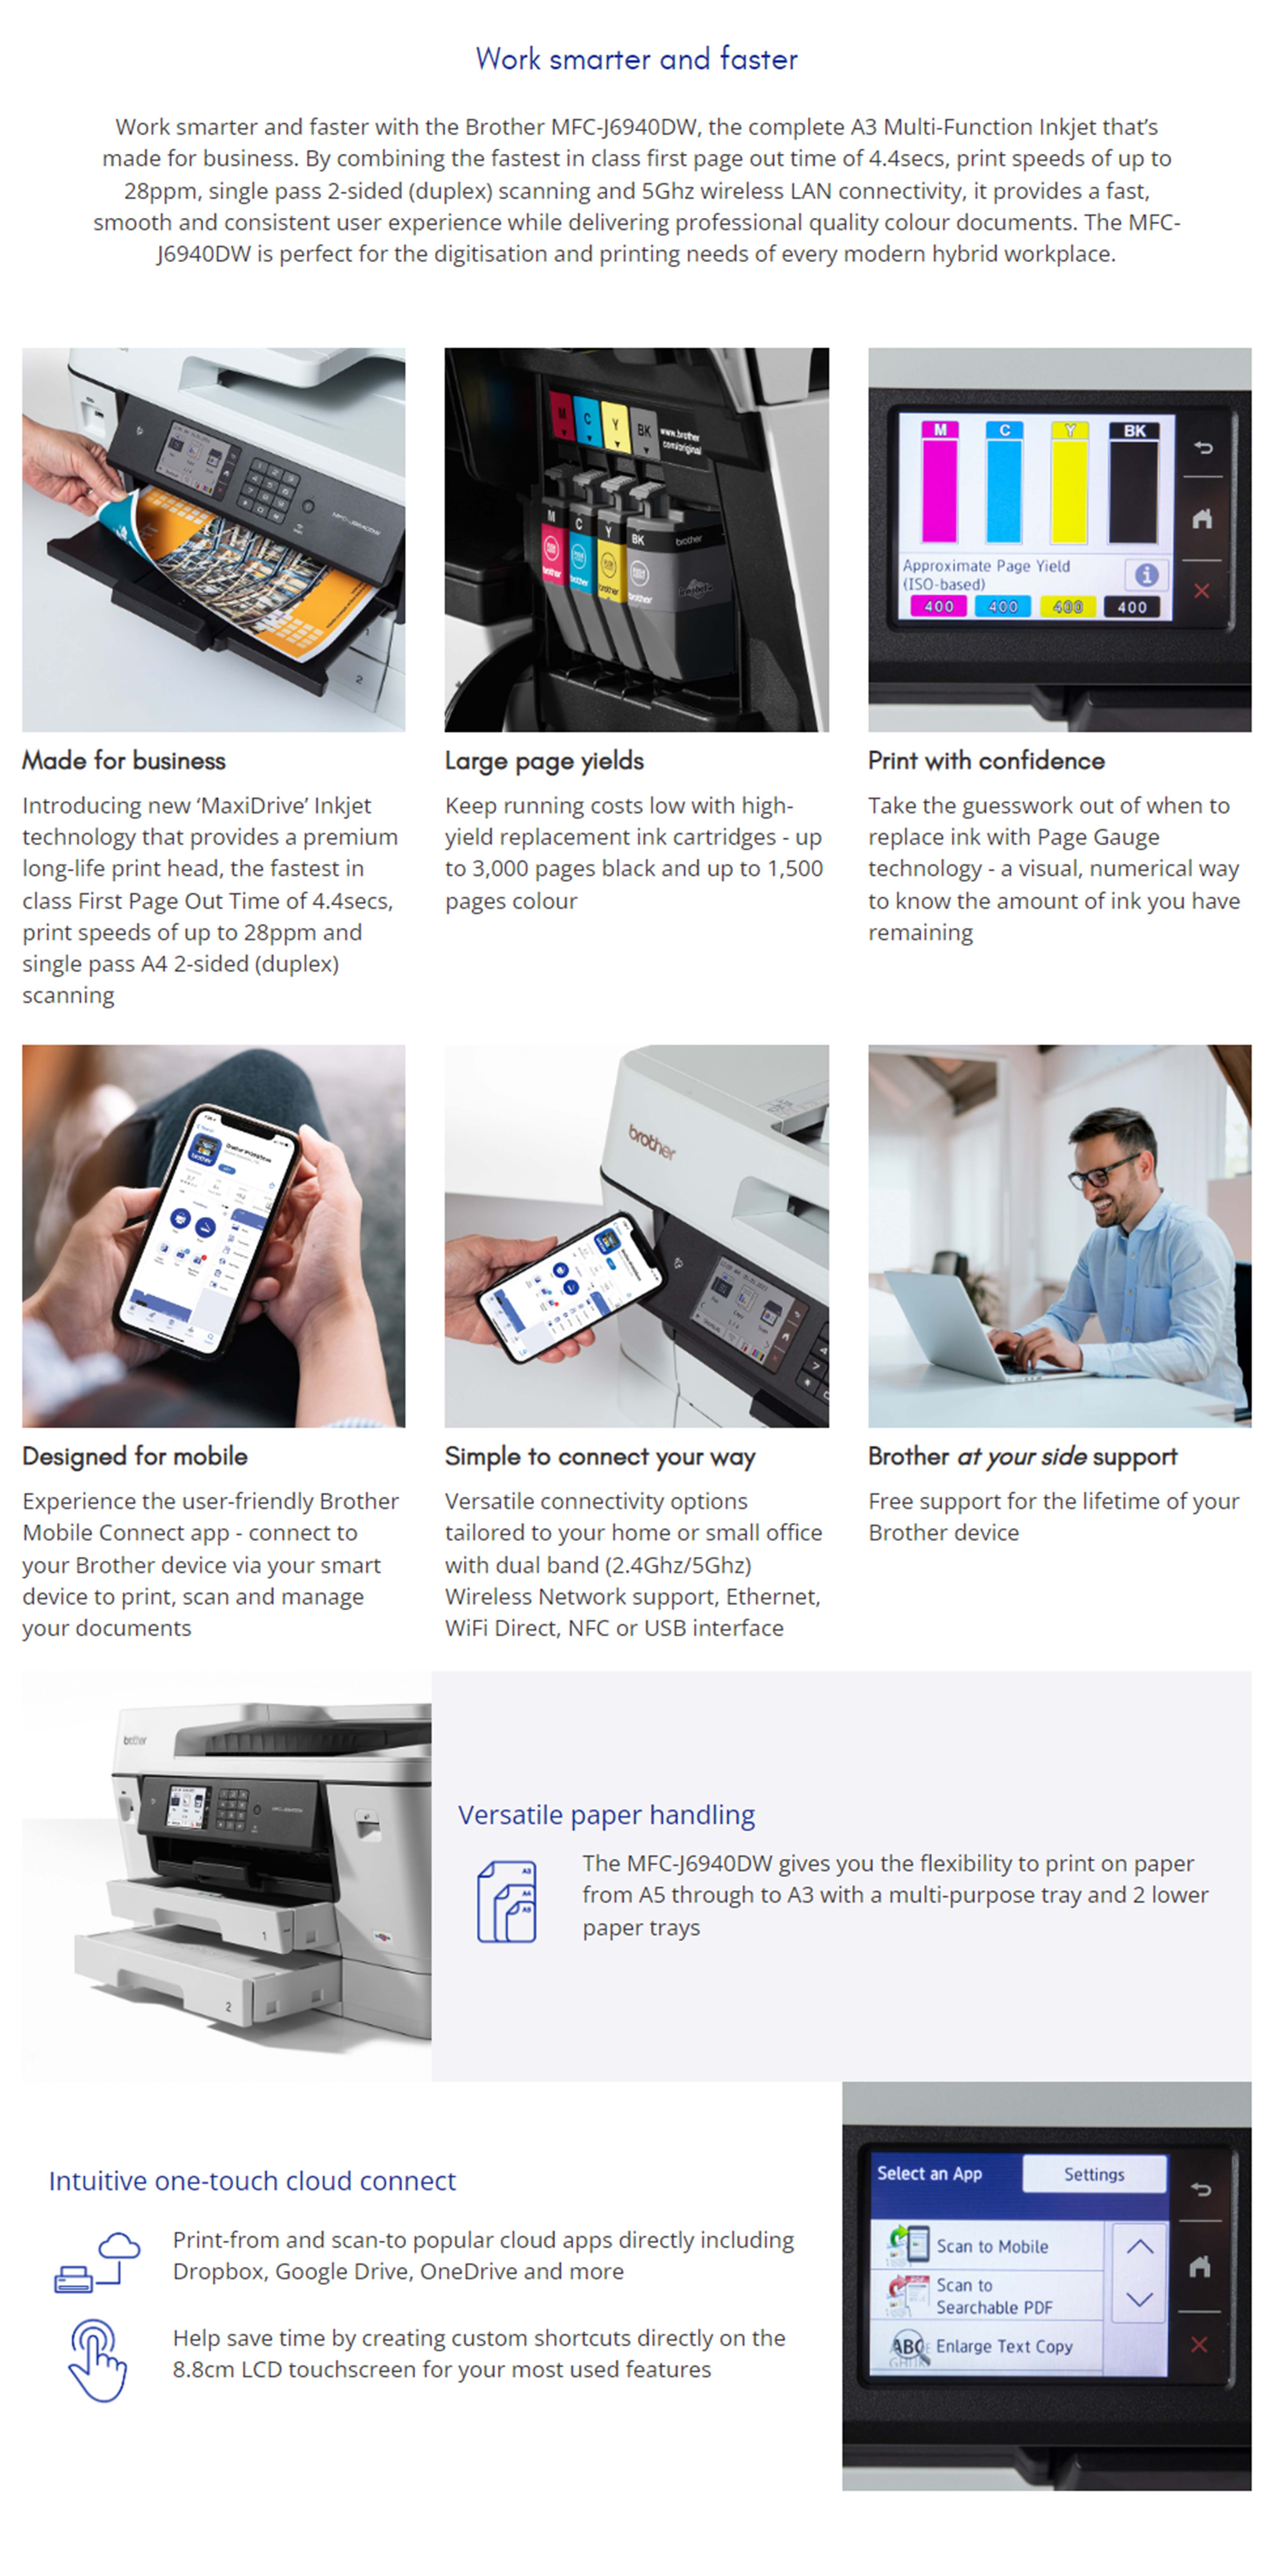 Multifunction-Printers-Brother-MFC-J6940DW-Inkjet-A3-Business-Multi-function-Printer-9